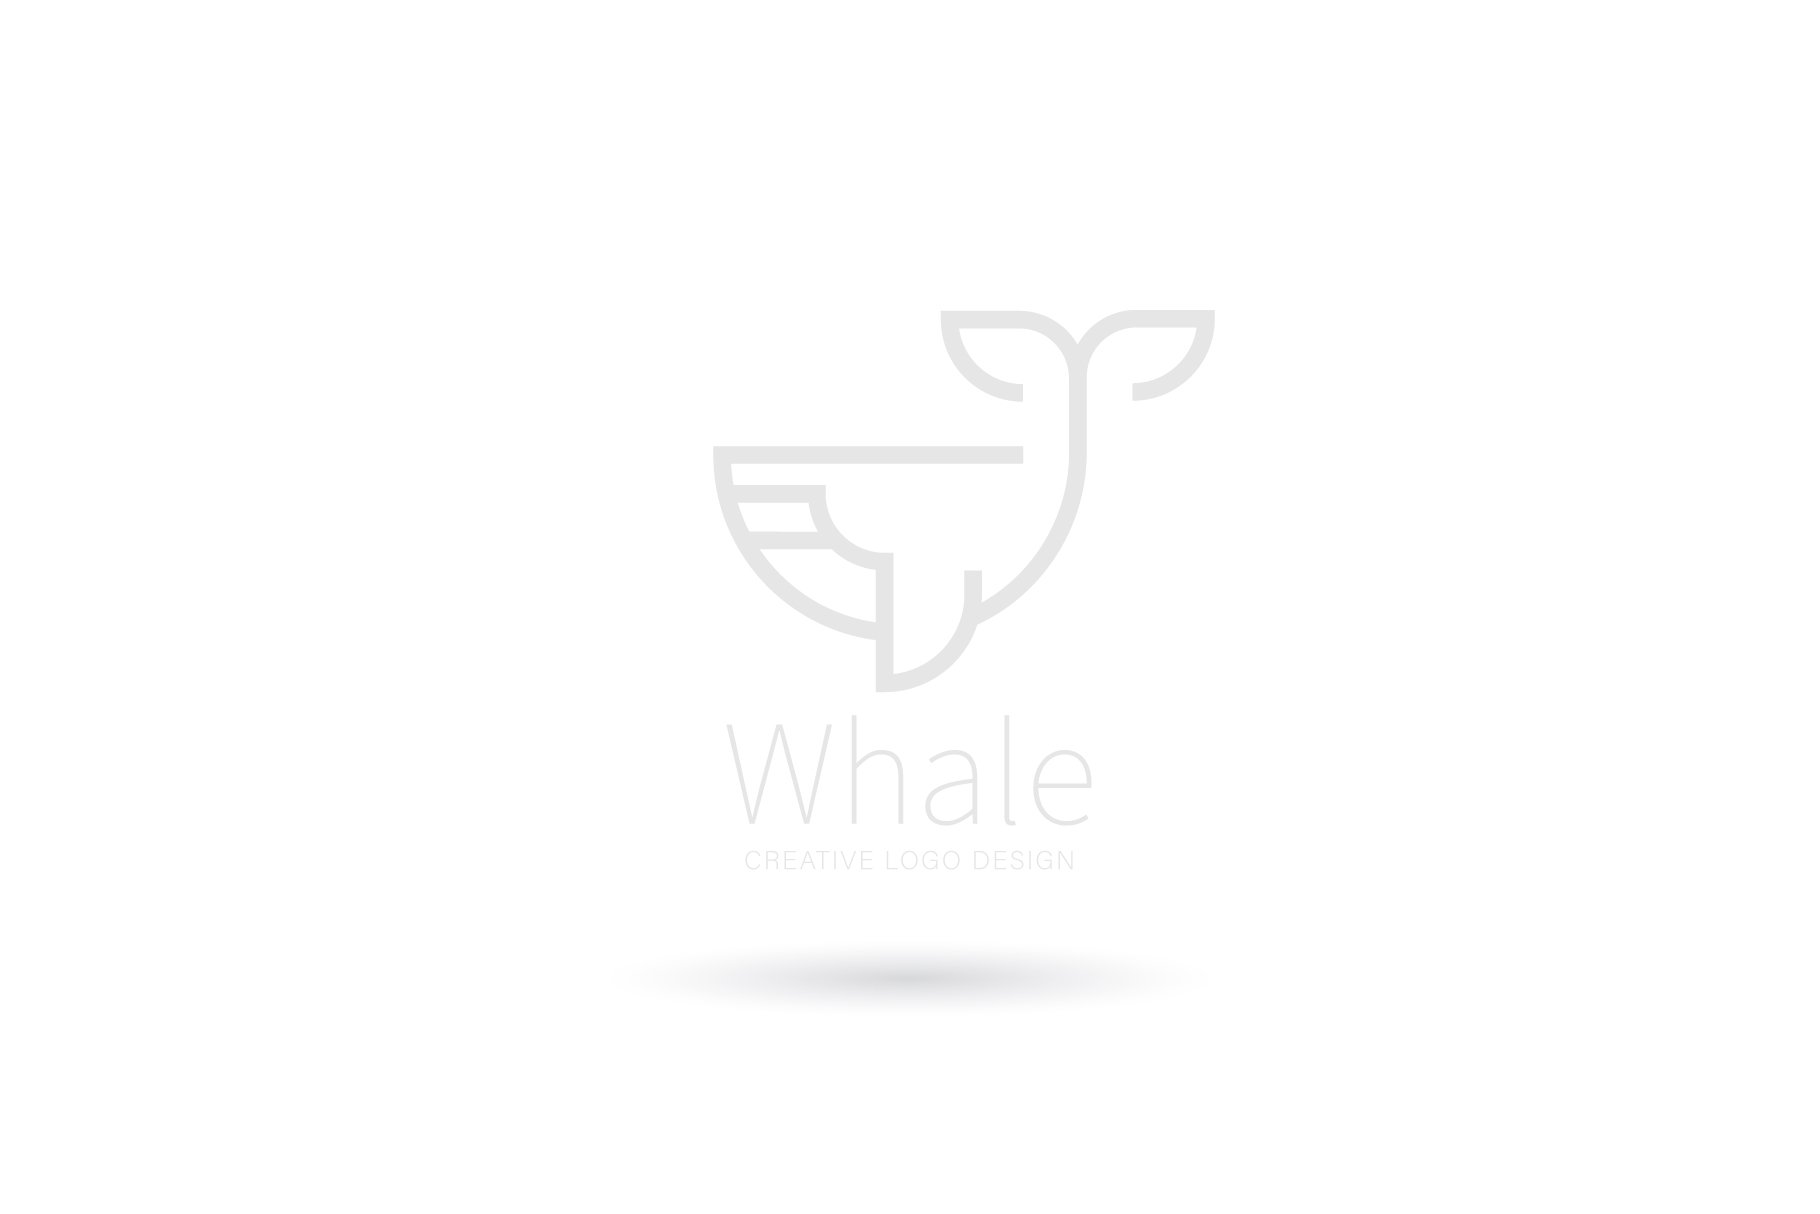 Whale logo preview image.